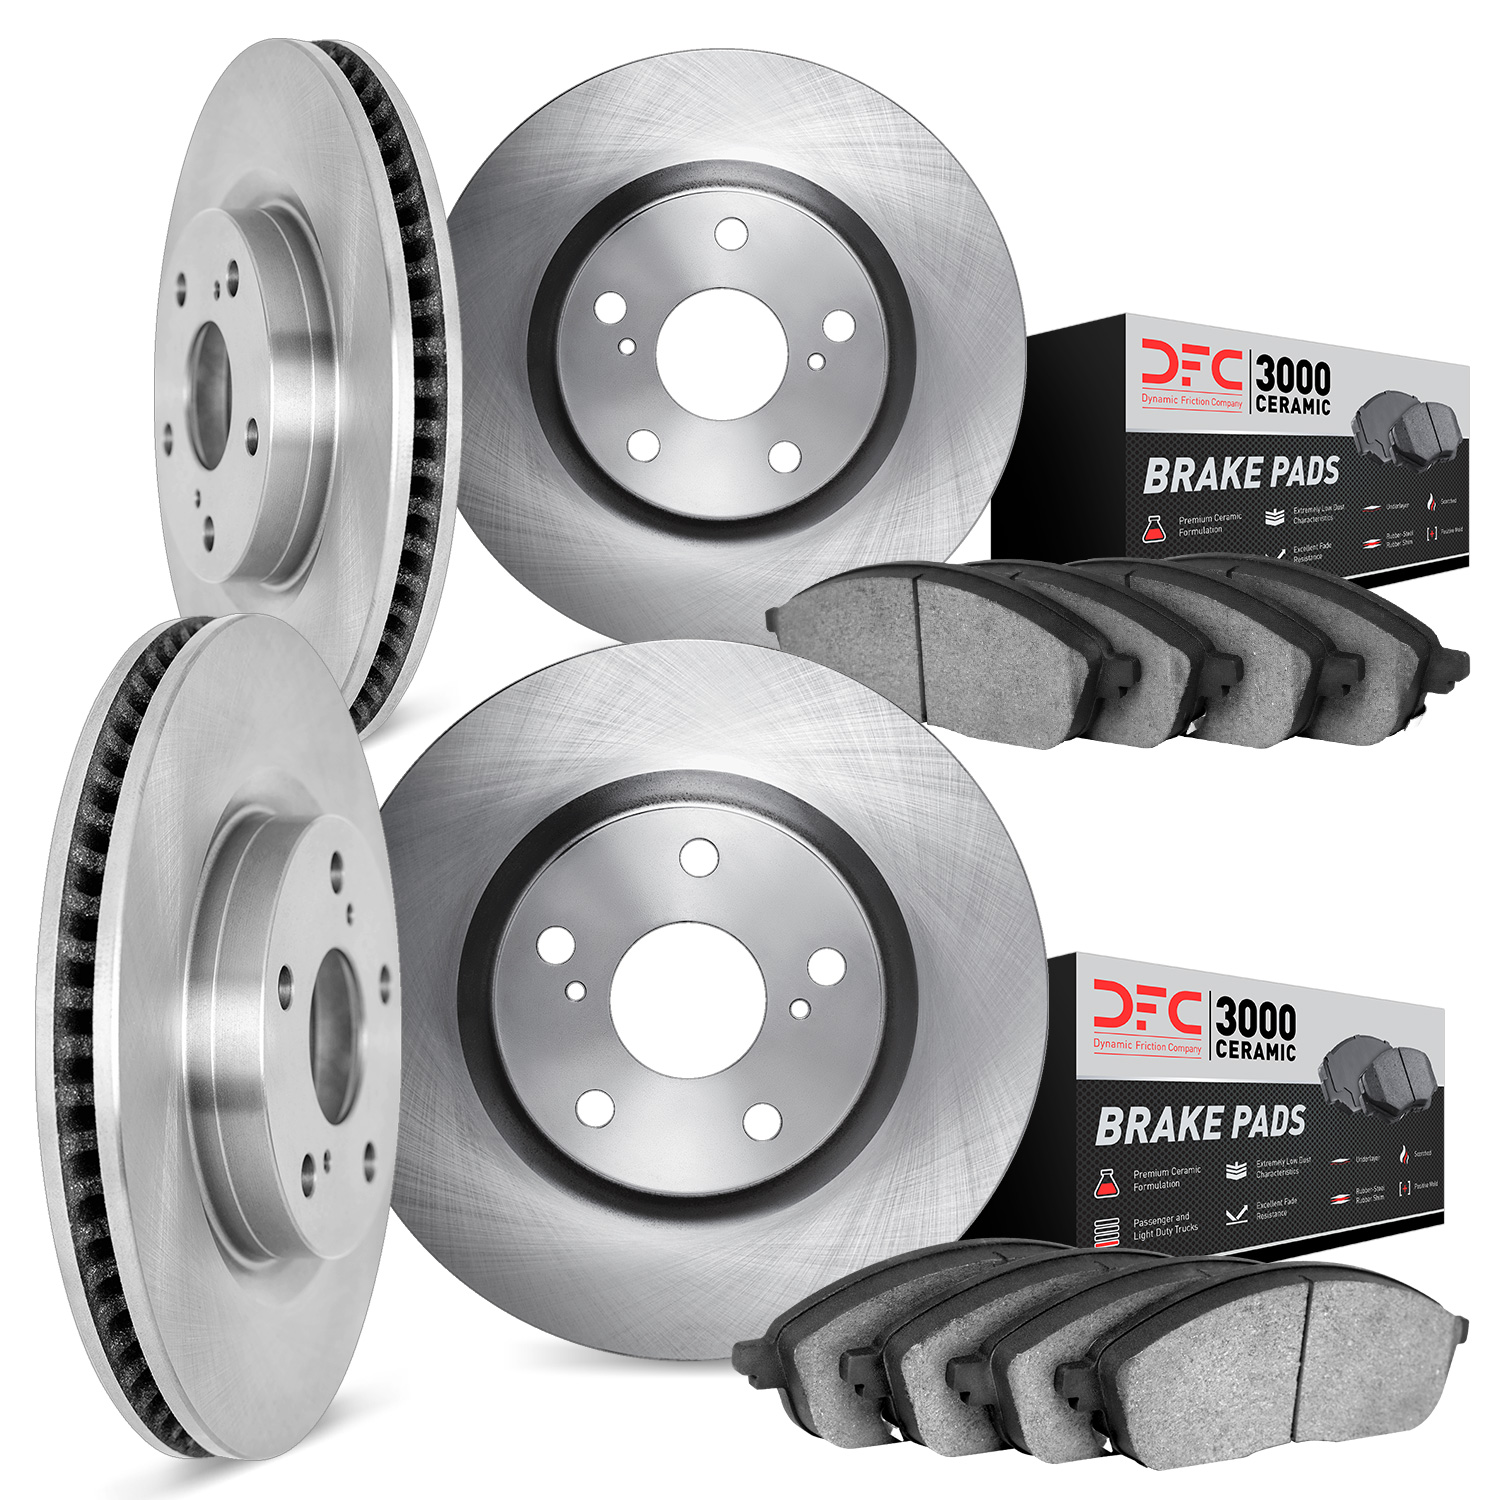 6304-31041 Brake Rotors with 3000-Series Ceramic Brake Pads Kit, 2004-2006 BMW, Position: Front and Rear